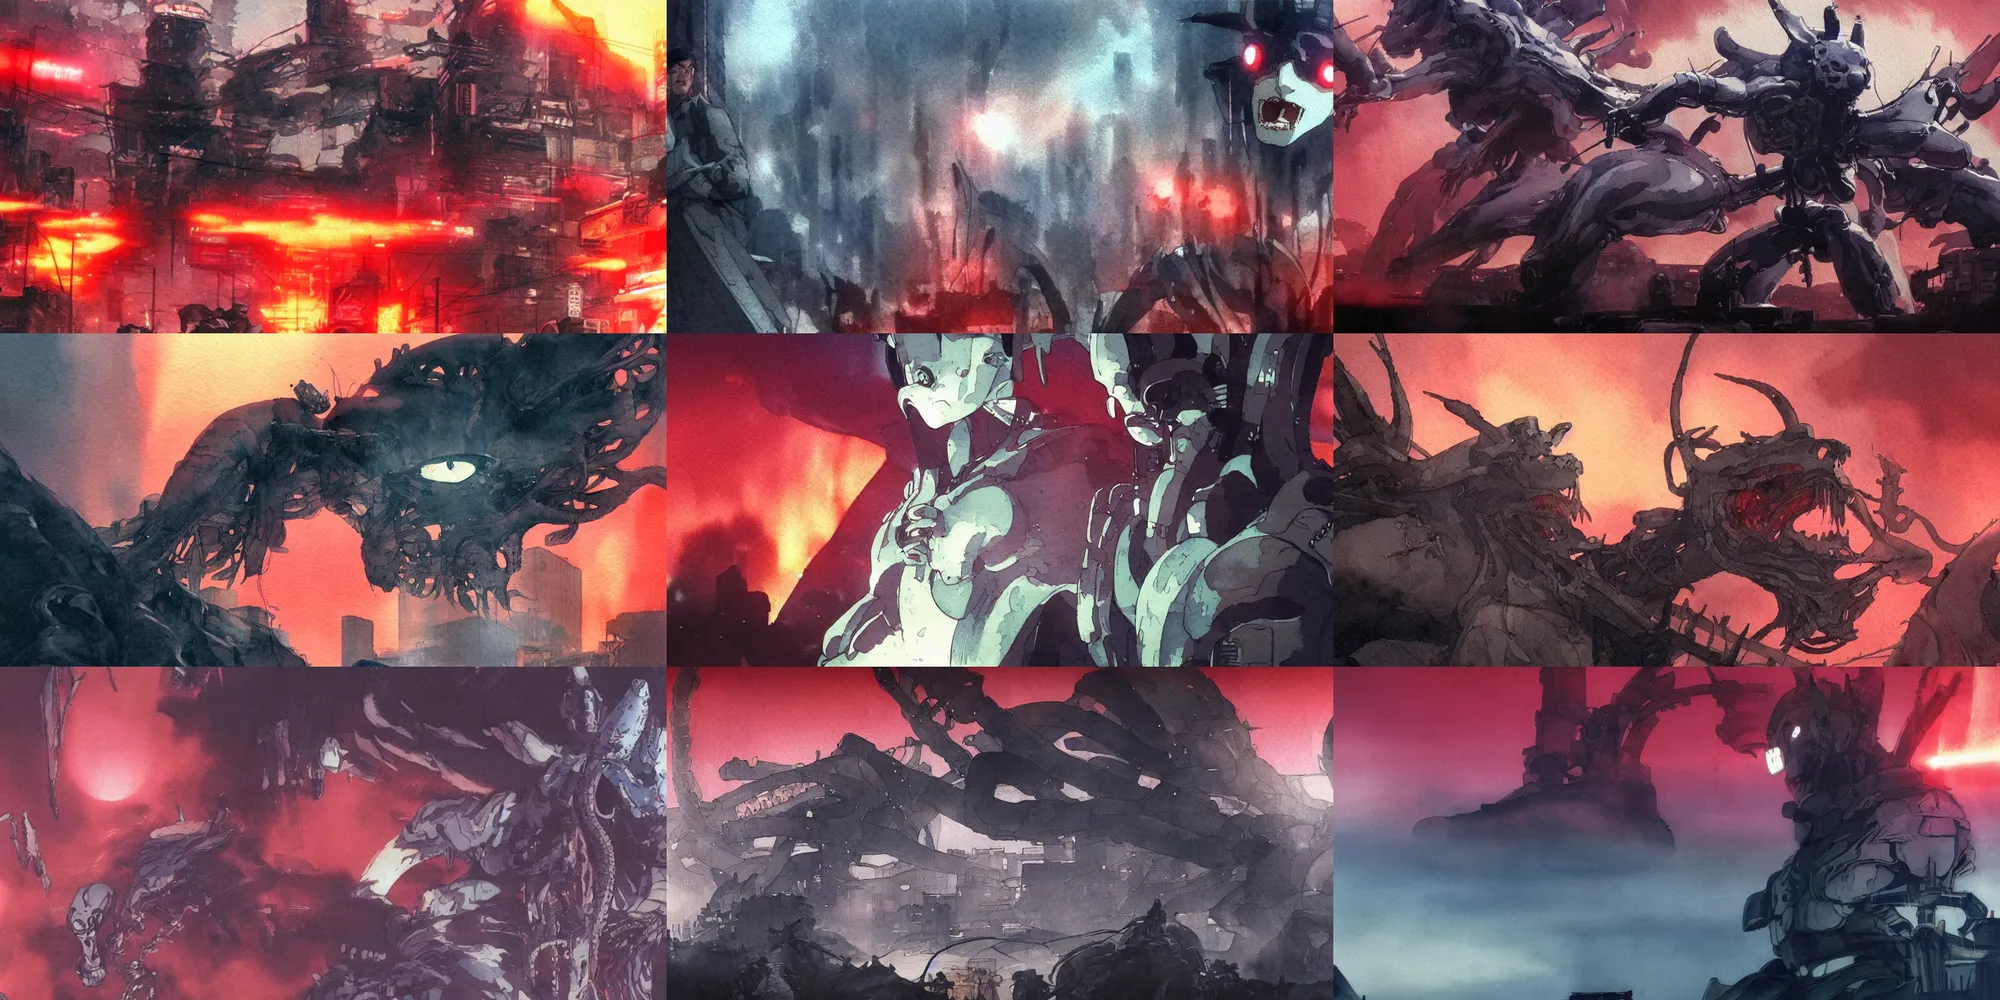 Prompt: incredible wide screenshot, simple watercolor, masamune shirow ghost in the shell movie scene close up broken Kusanagi tank battle in shinjuku, snake skeleton, hydra, giant face made of stone, hell portal open, ghost, teeth,black smoke, red sky, sunset, bright flash, texture, strange, impossible, fur, spines, mouth, laser, brain, shell, fight, potato skin, brown mud, dust, titanic tank with legs, robot arm, ripped to shreds, wide eyes shocked expression, overhead wires, telephone pole, sparks, lightning, electricity, light rain, shinjuku, cherry blossom, hd, 4k, remaster, dynamic camera angle, deep 3 point perspective, fish eye, dynamic scene